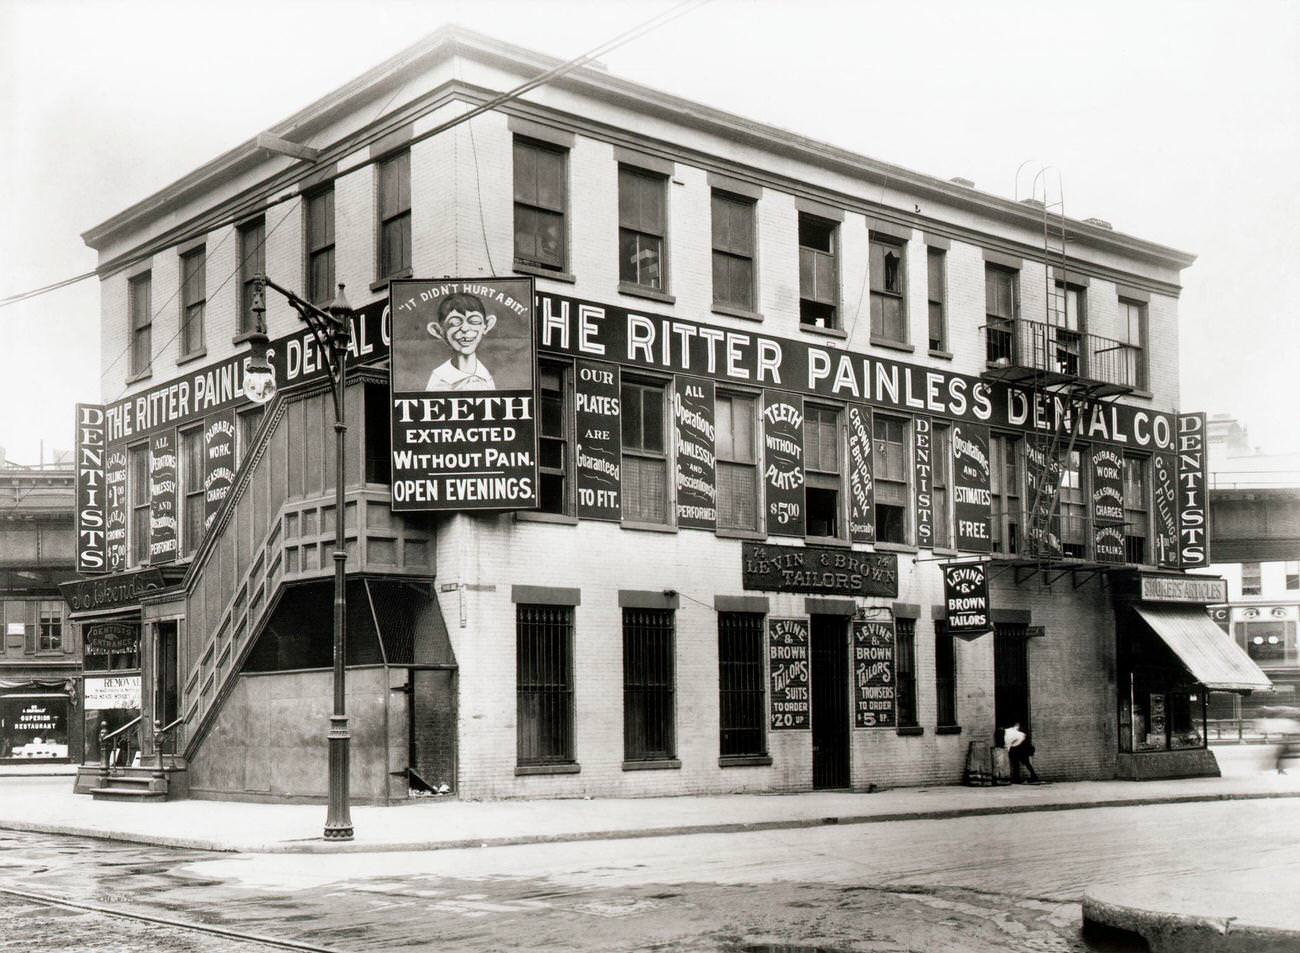 Ritter Painless Dental Offices In Brooklyn, 1890